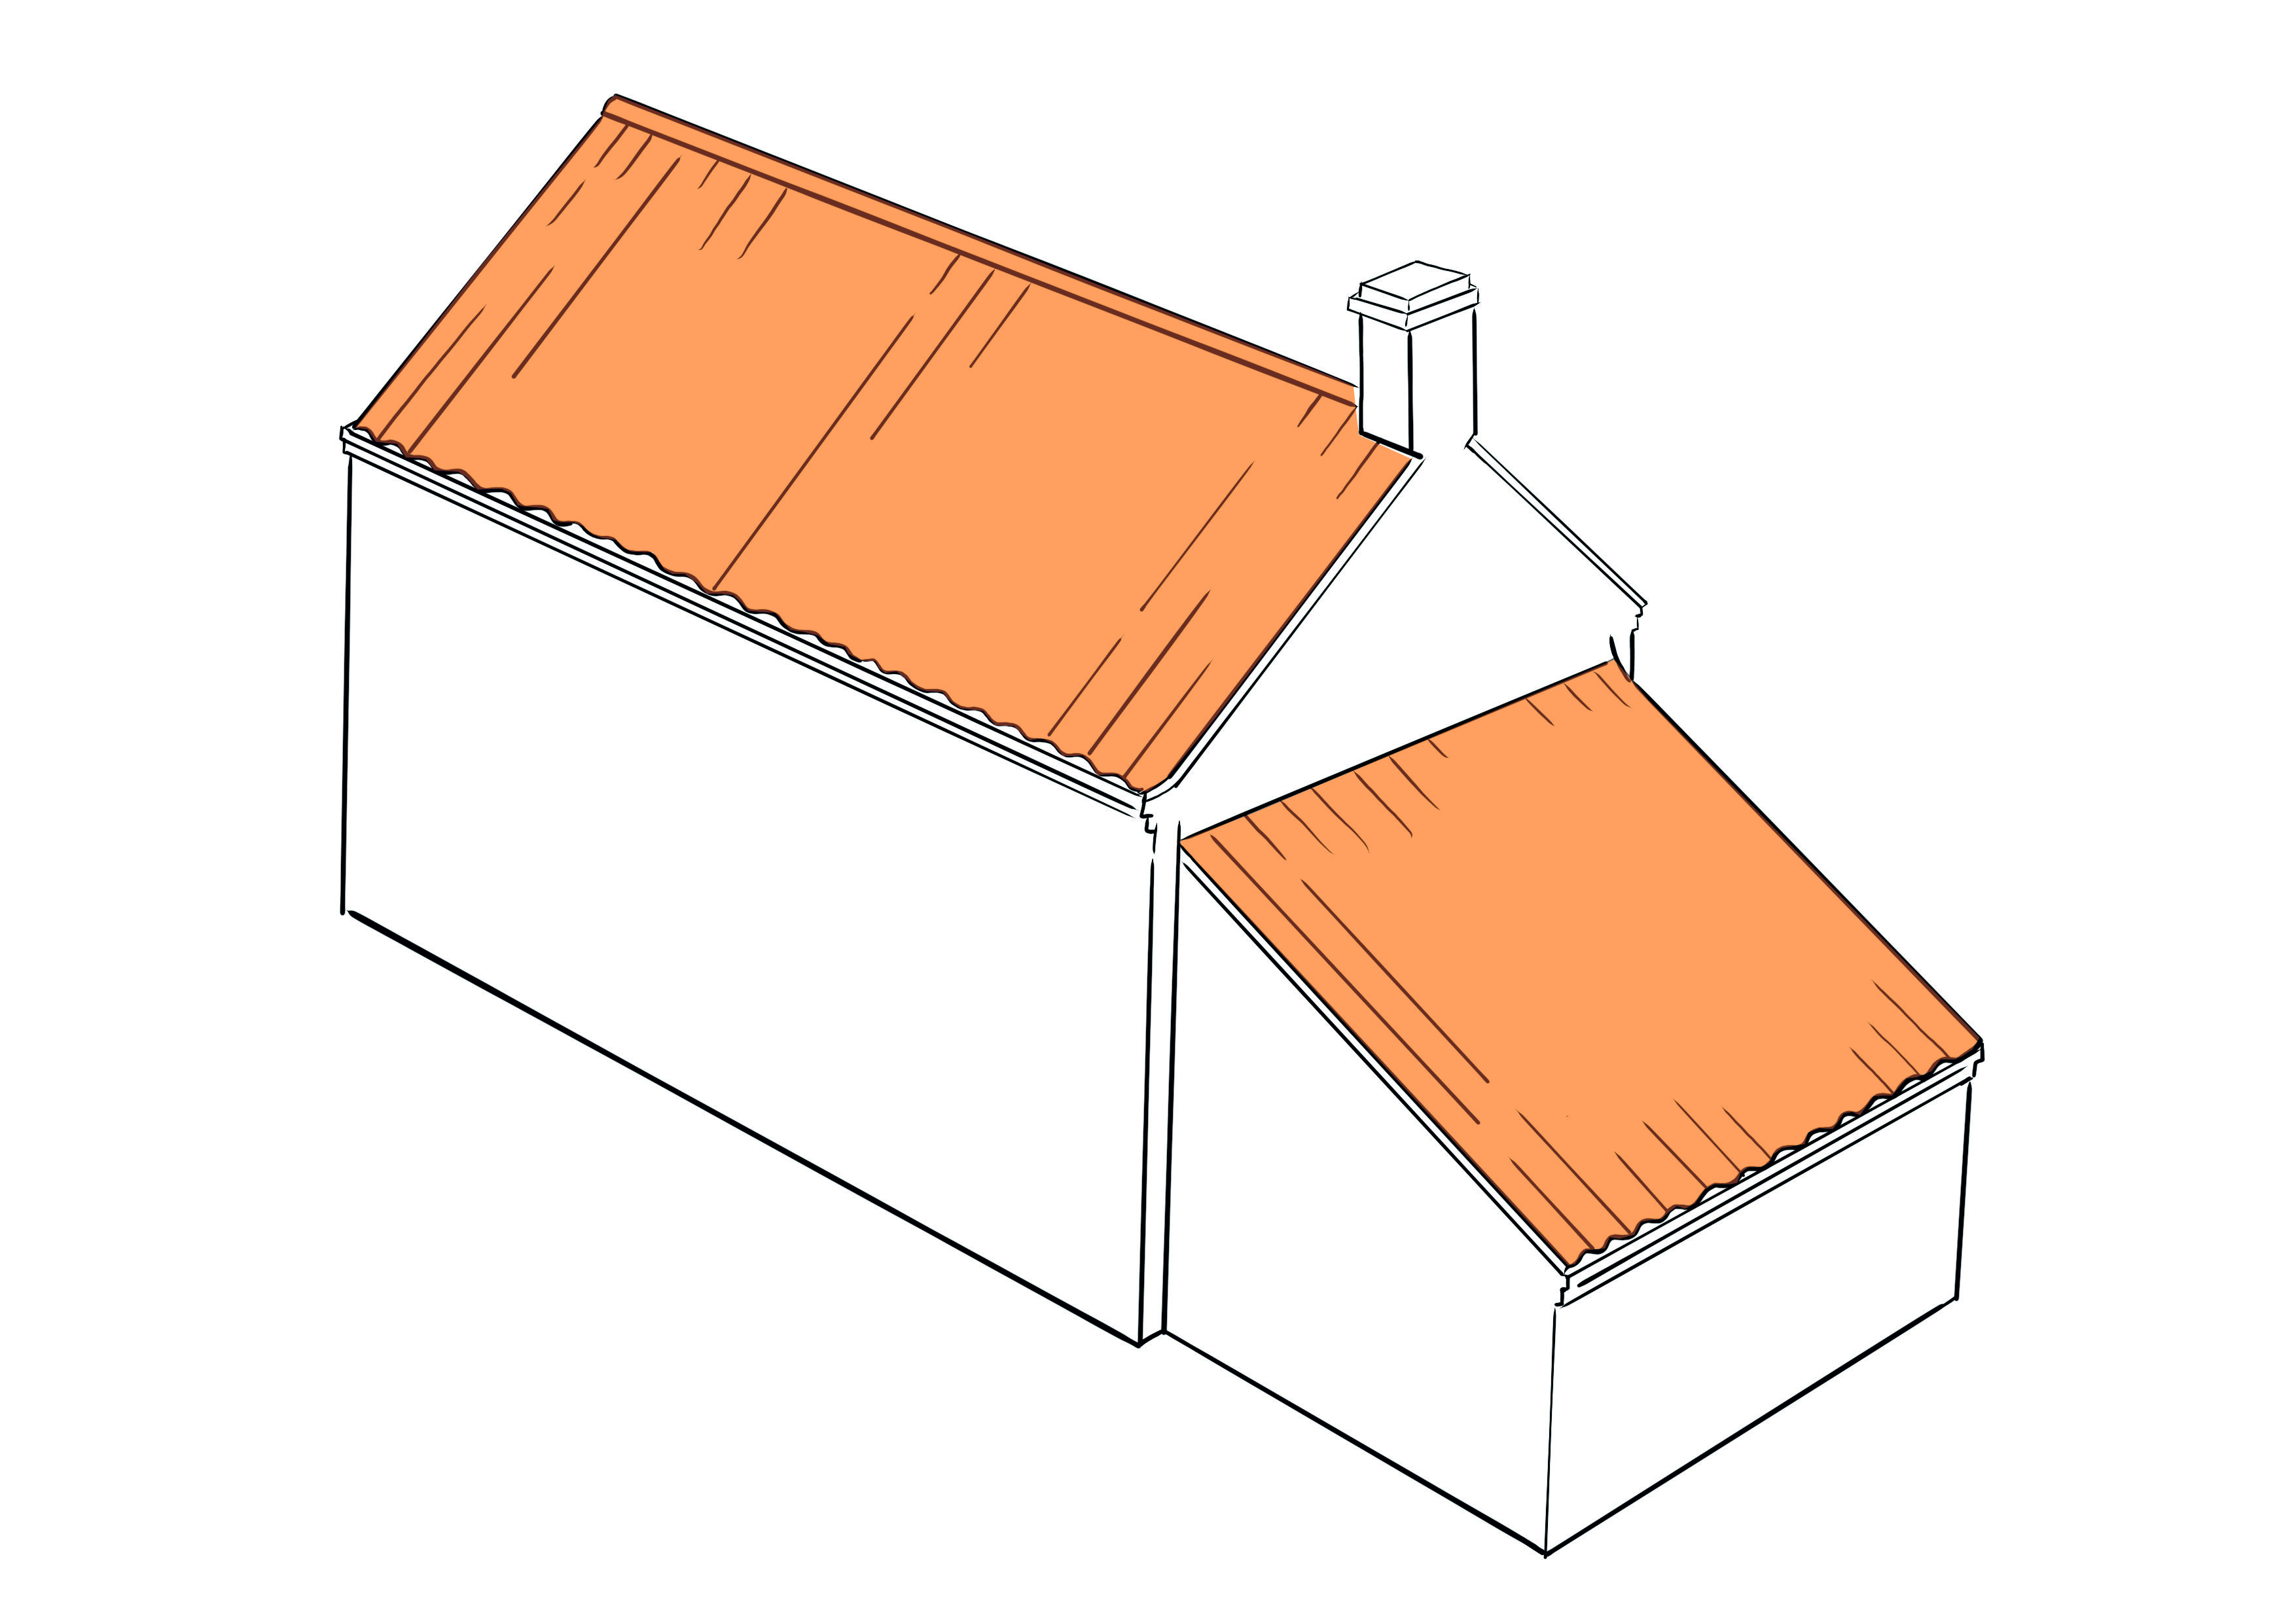 Catslide extension to gable